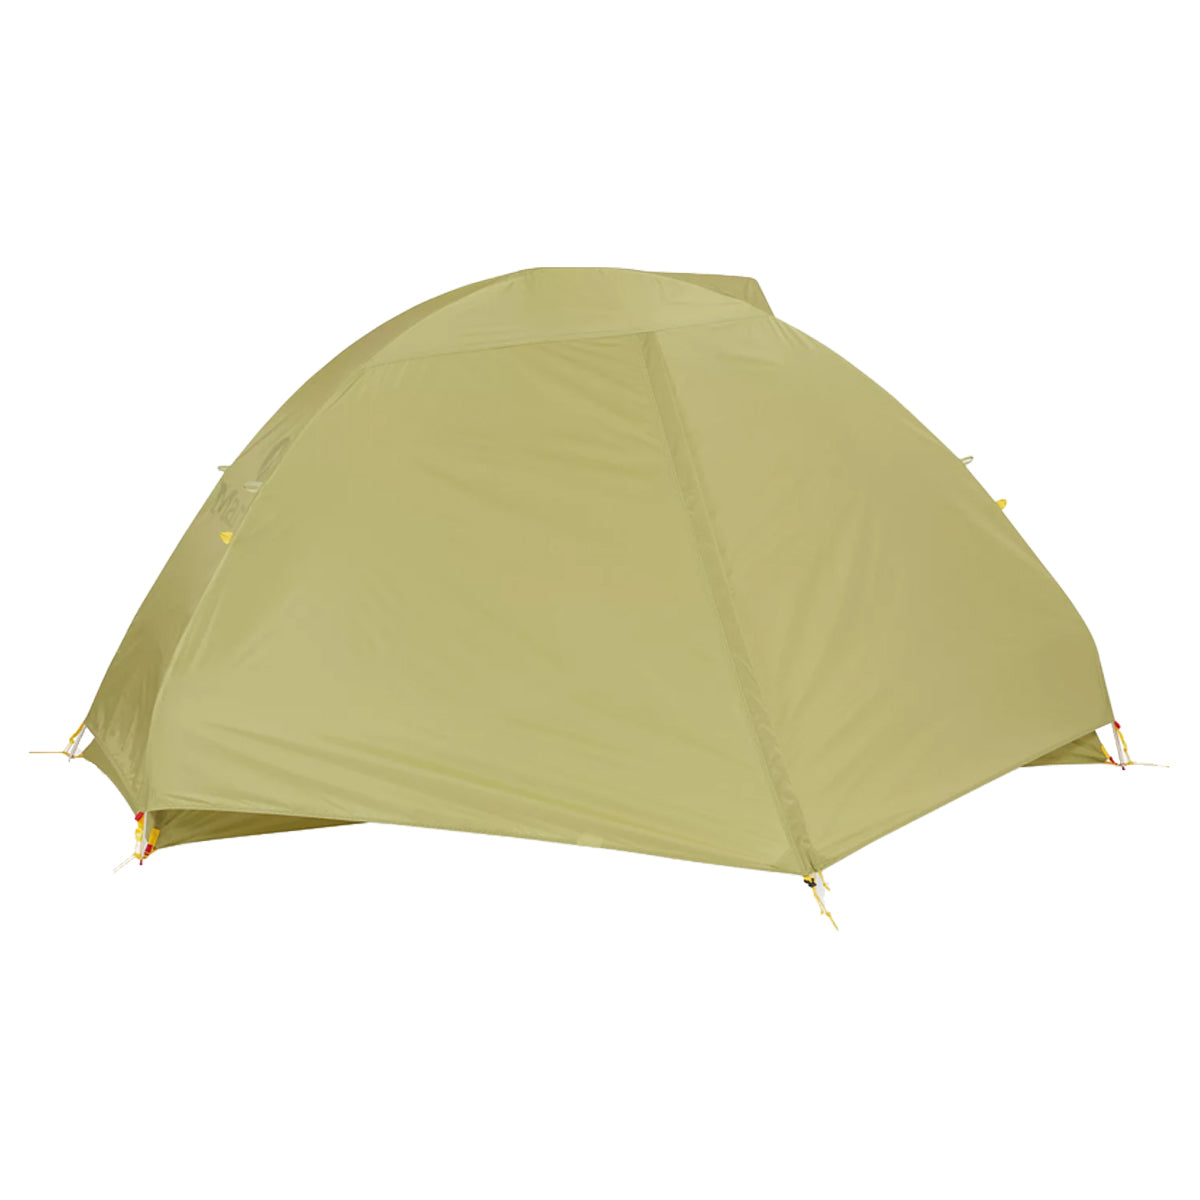 Marmot Tungsten UL 1 Person Tent in  by GOHUNT | Marmot - GOHUNT Shop